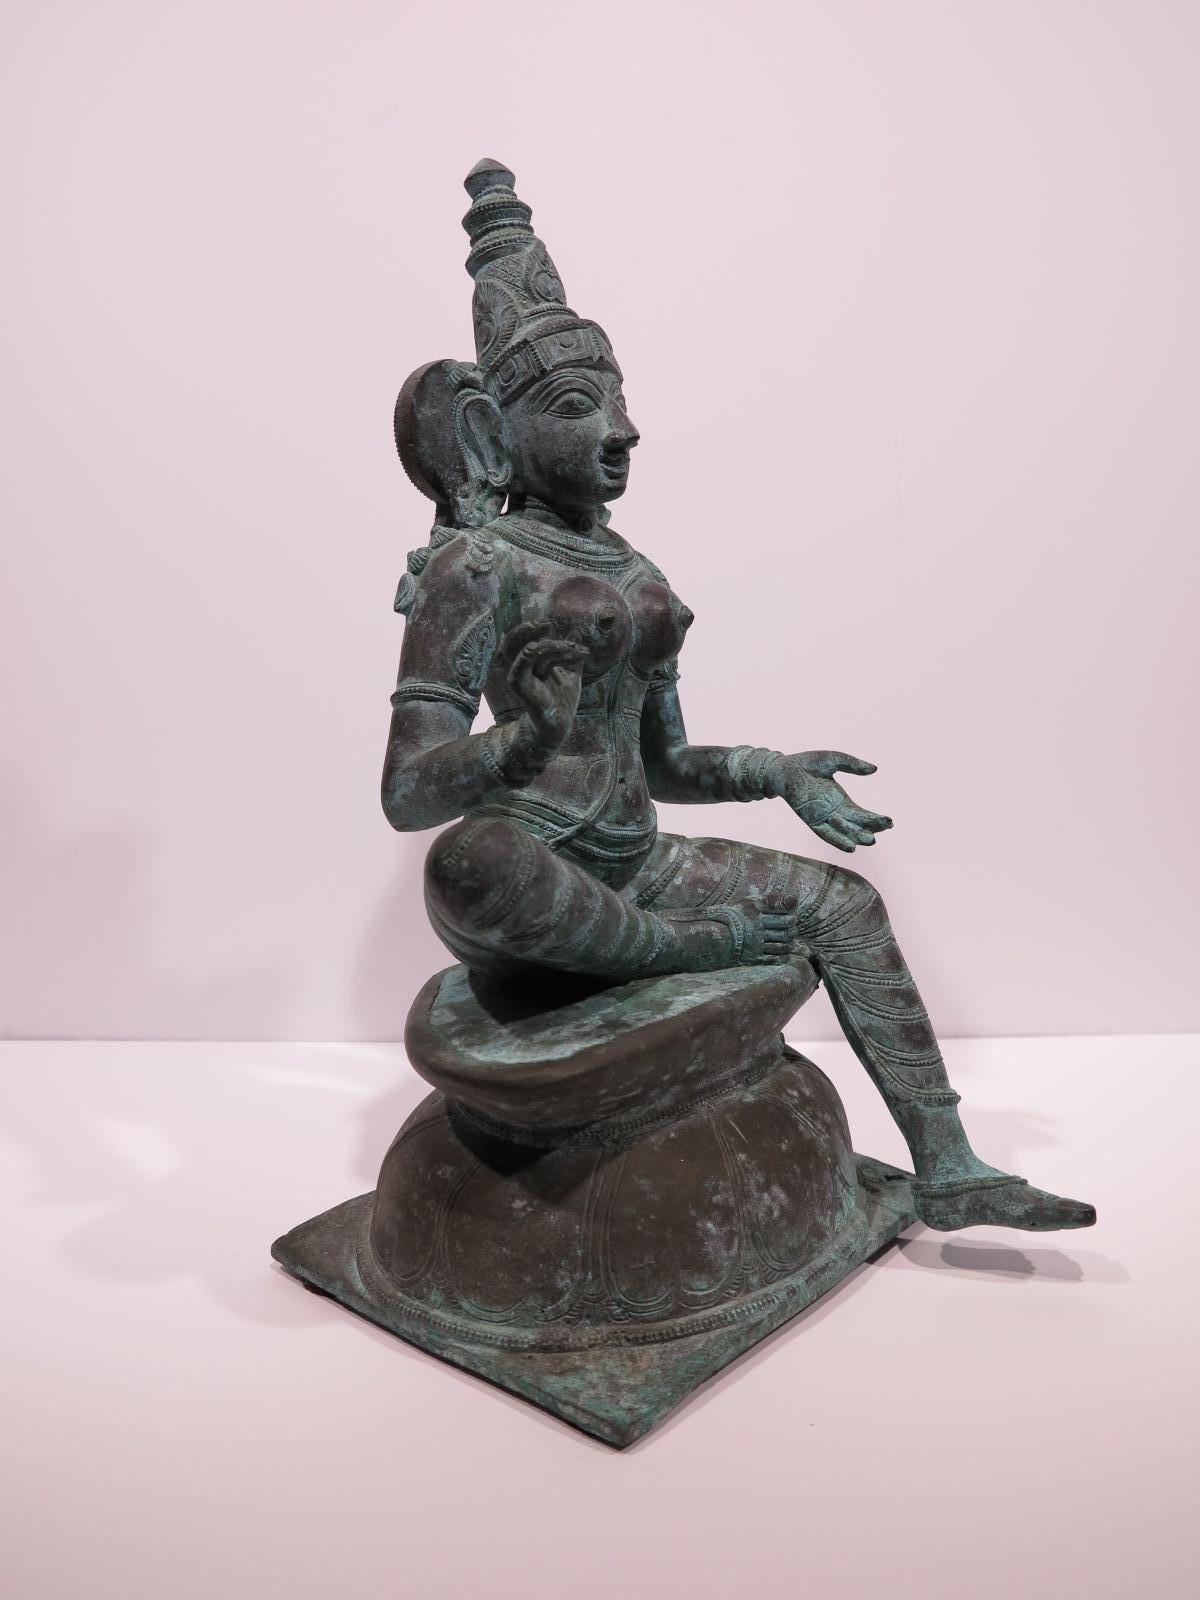 19th-century Indian Chola bronze figure of a goddess  - Sculpture by Unknown